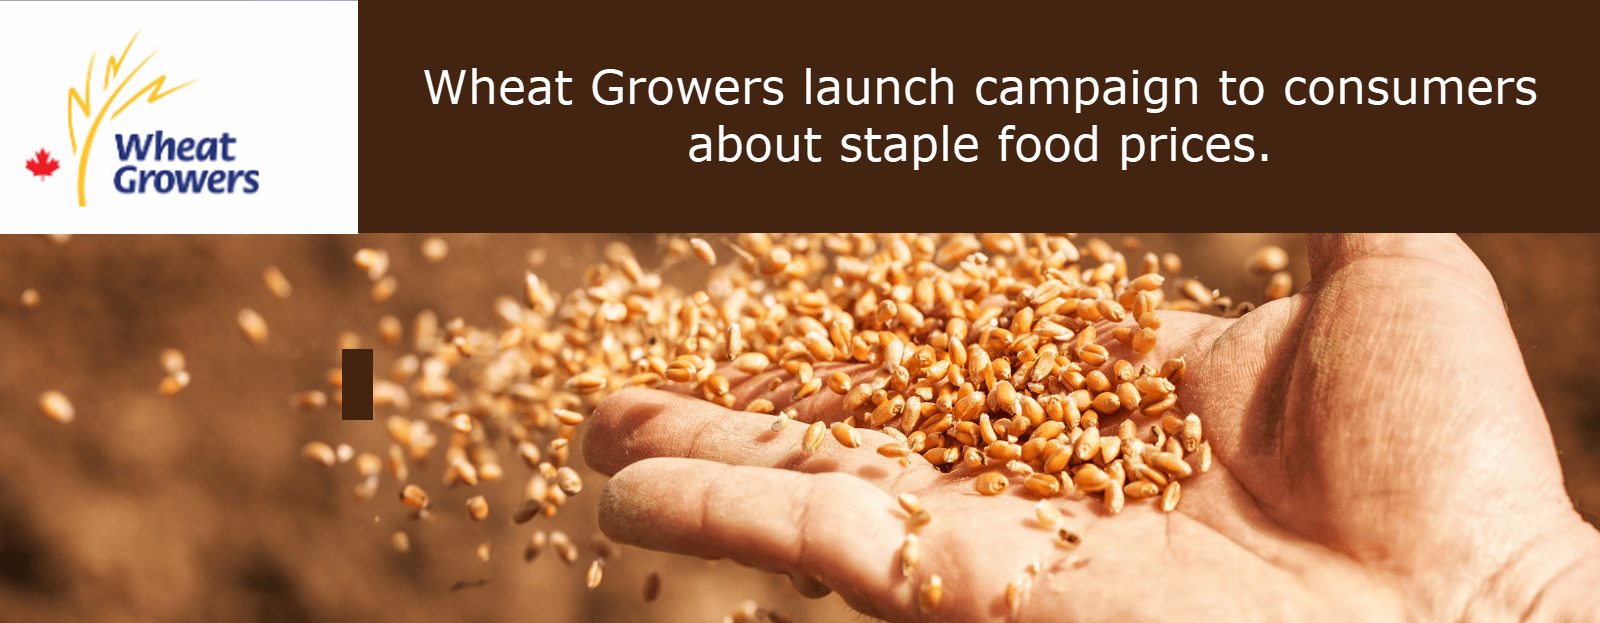 Wheat Growers launch campaign to consumers about staple food prices